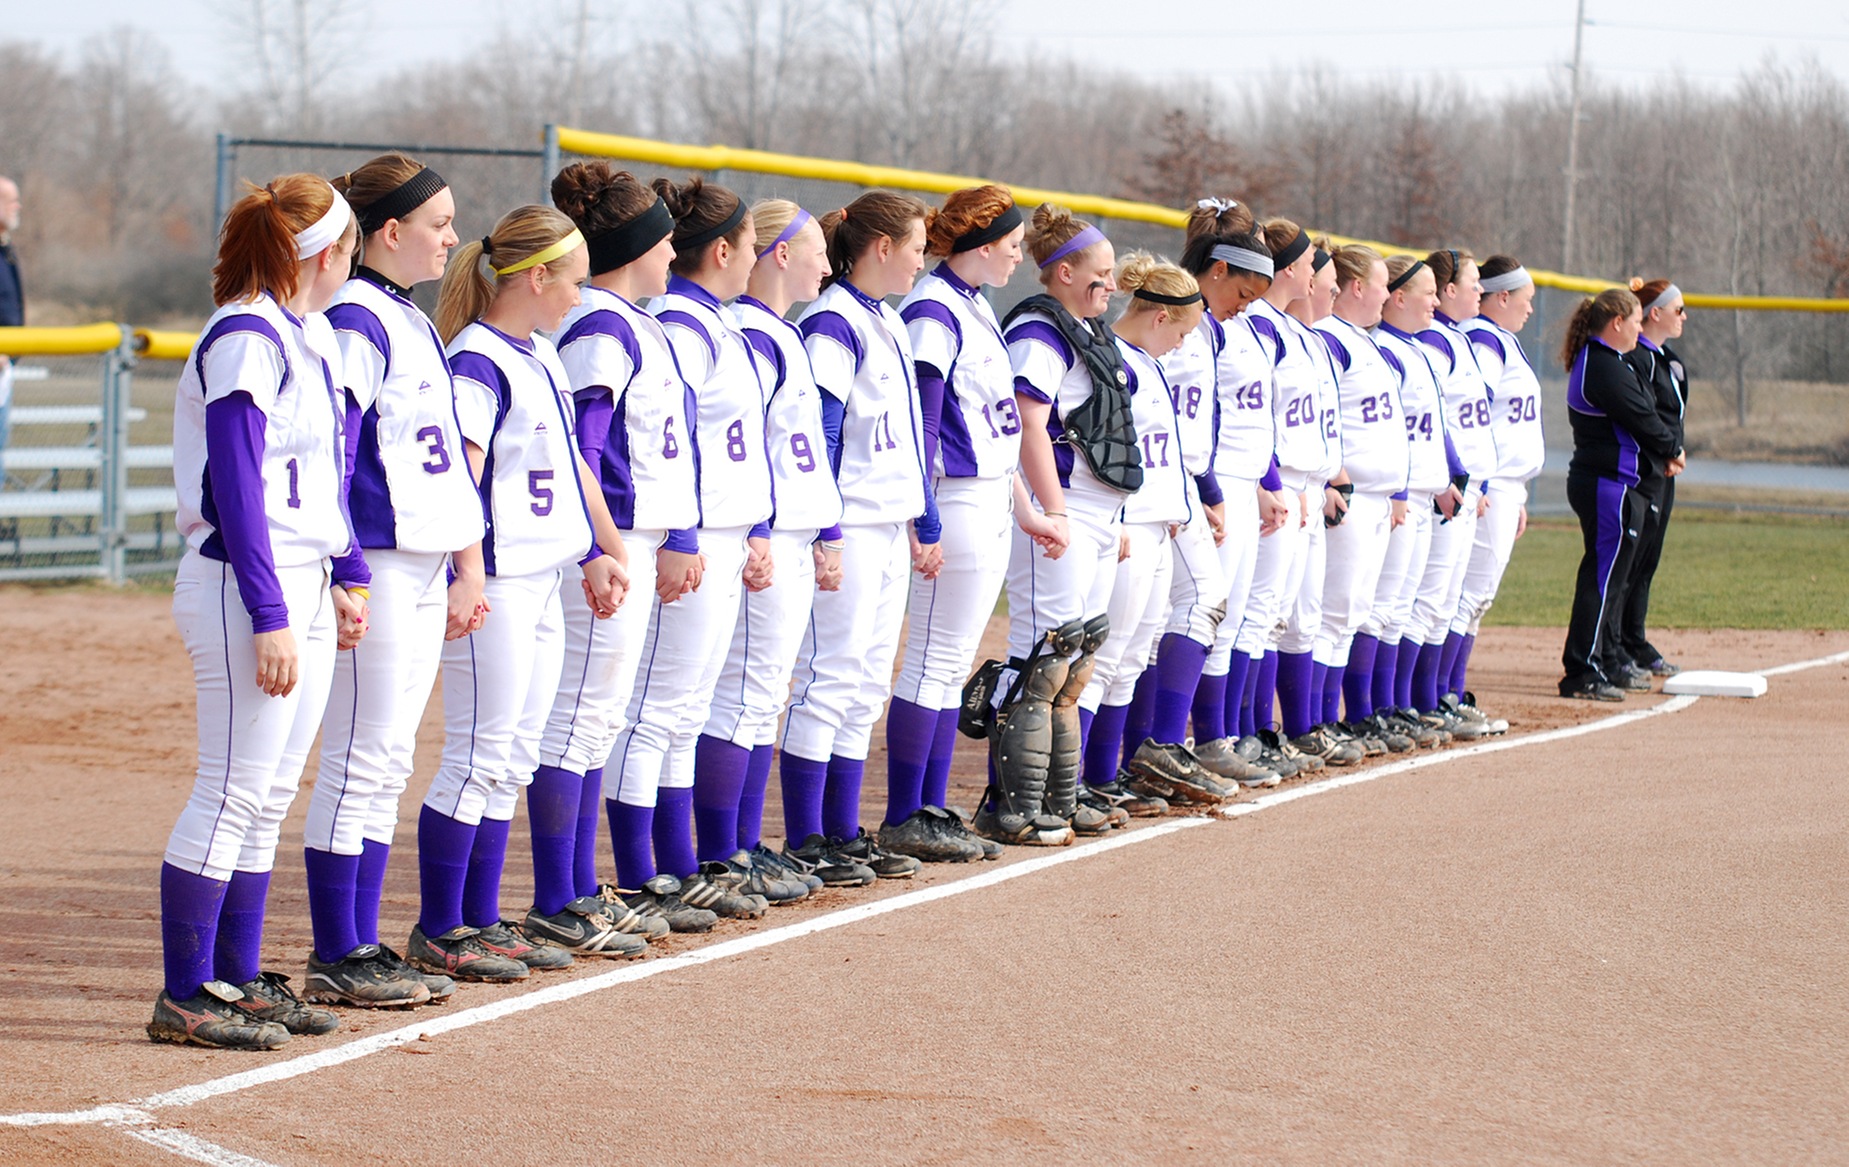 Stagnant Offense Hurts DC in Doubleheader with ONU